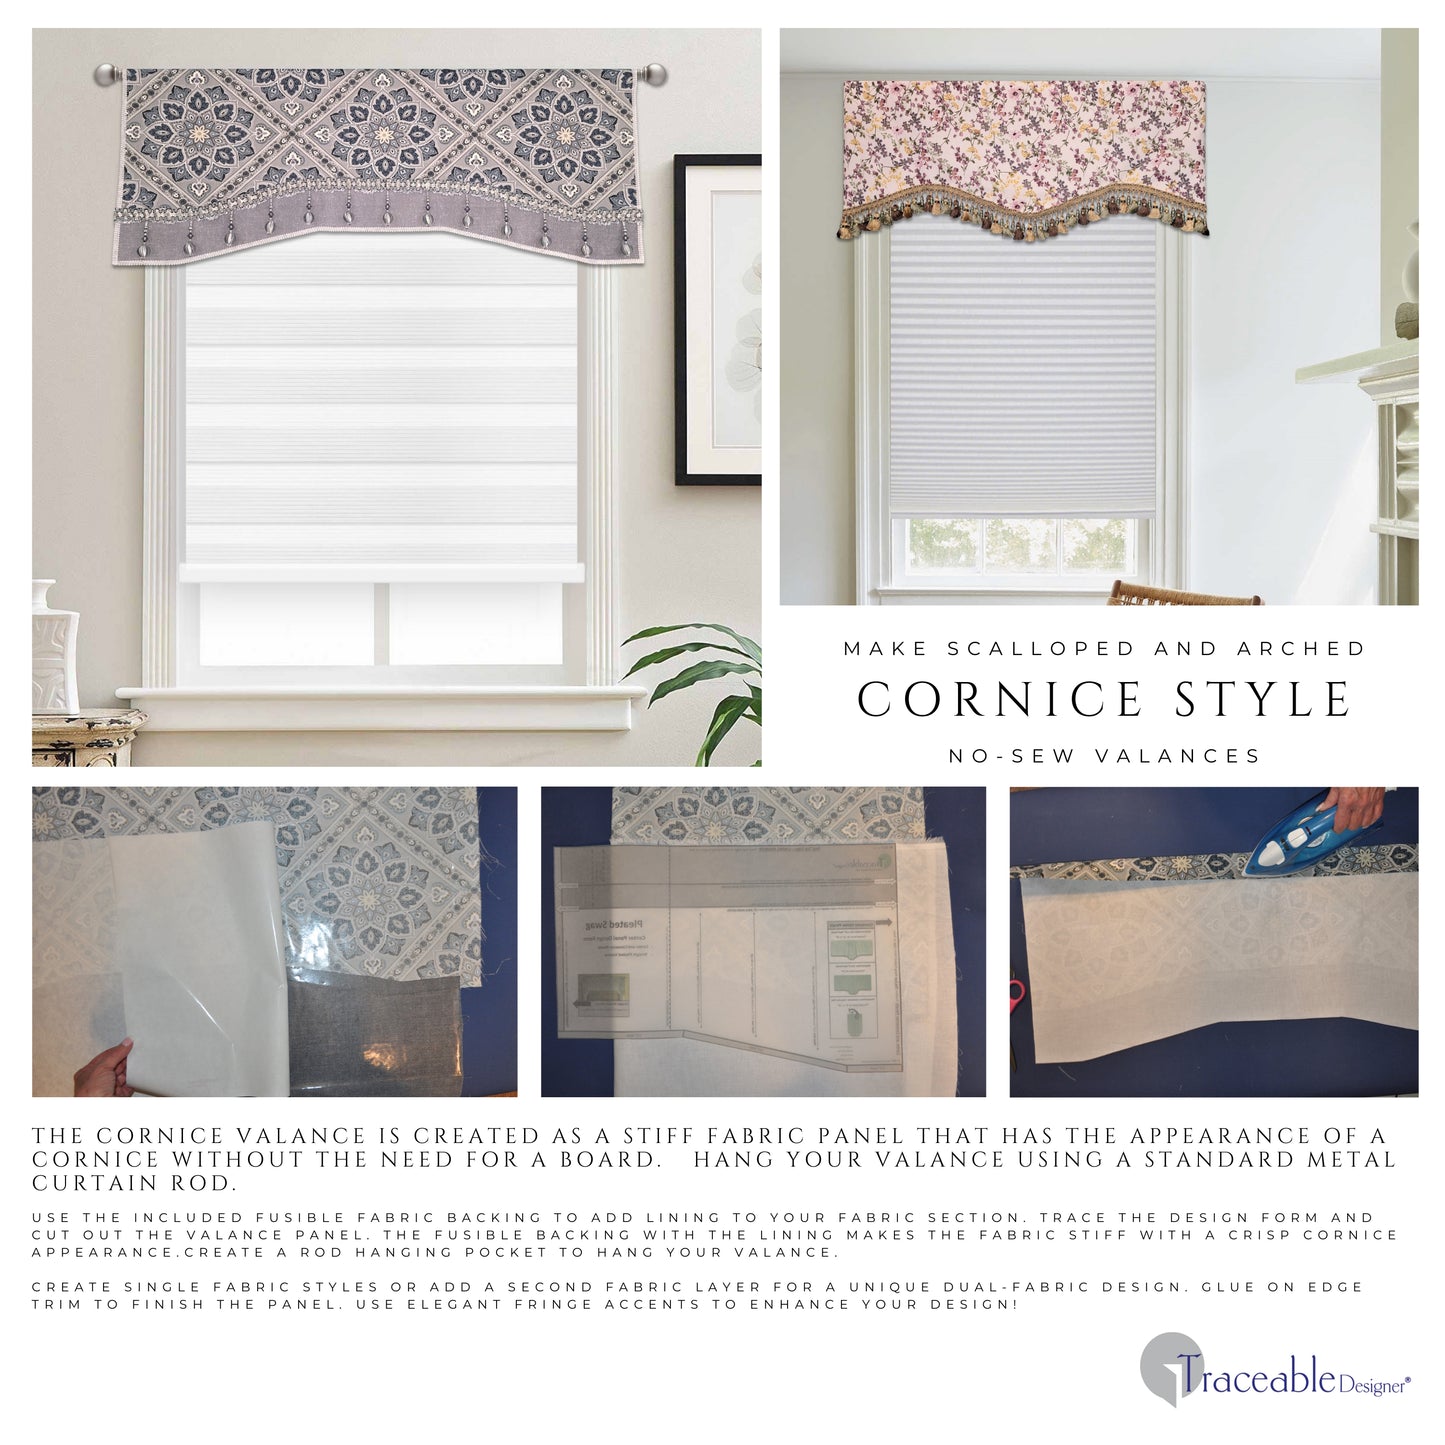 Traceable Designer No-Sew Curtain Valance Kit. Reusable Traceable Valance Design Form for Making Pleated, Gathered, and Cornice Valance Styles Without Sewing! Fit All Window Sizes. Use a 1" curtain Rod.